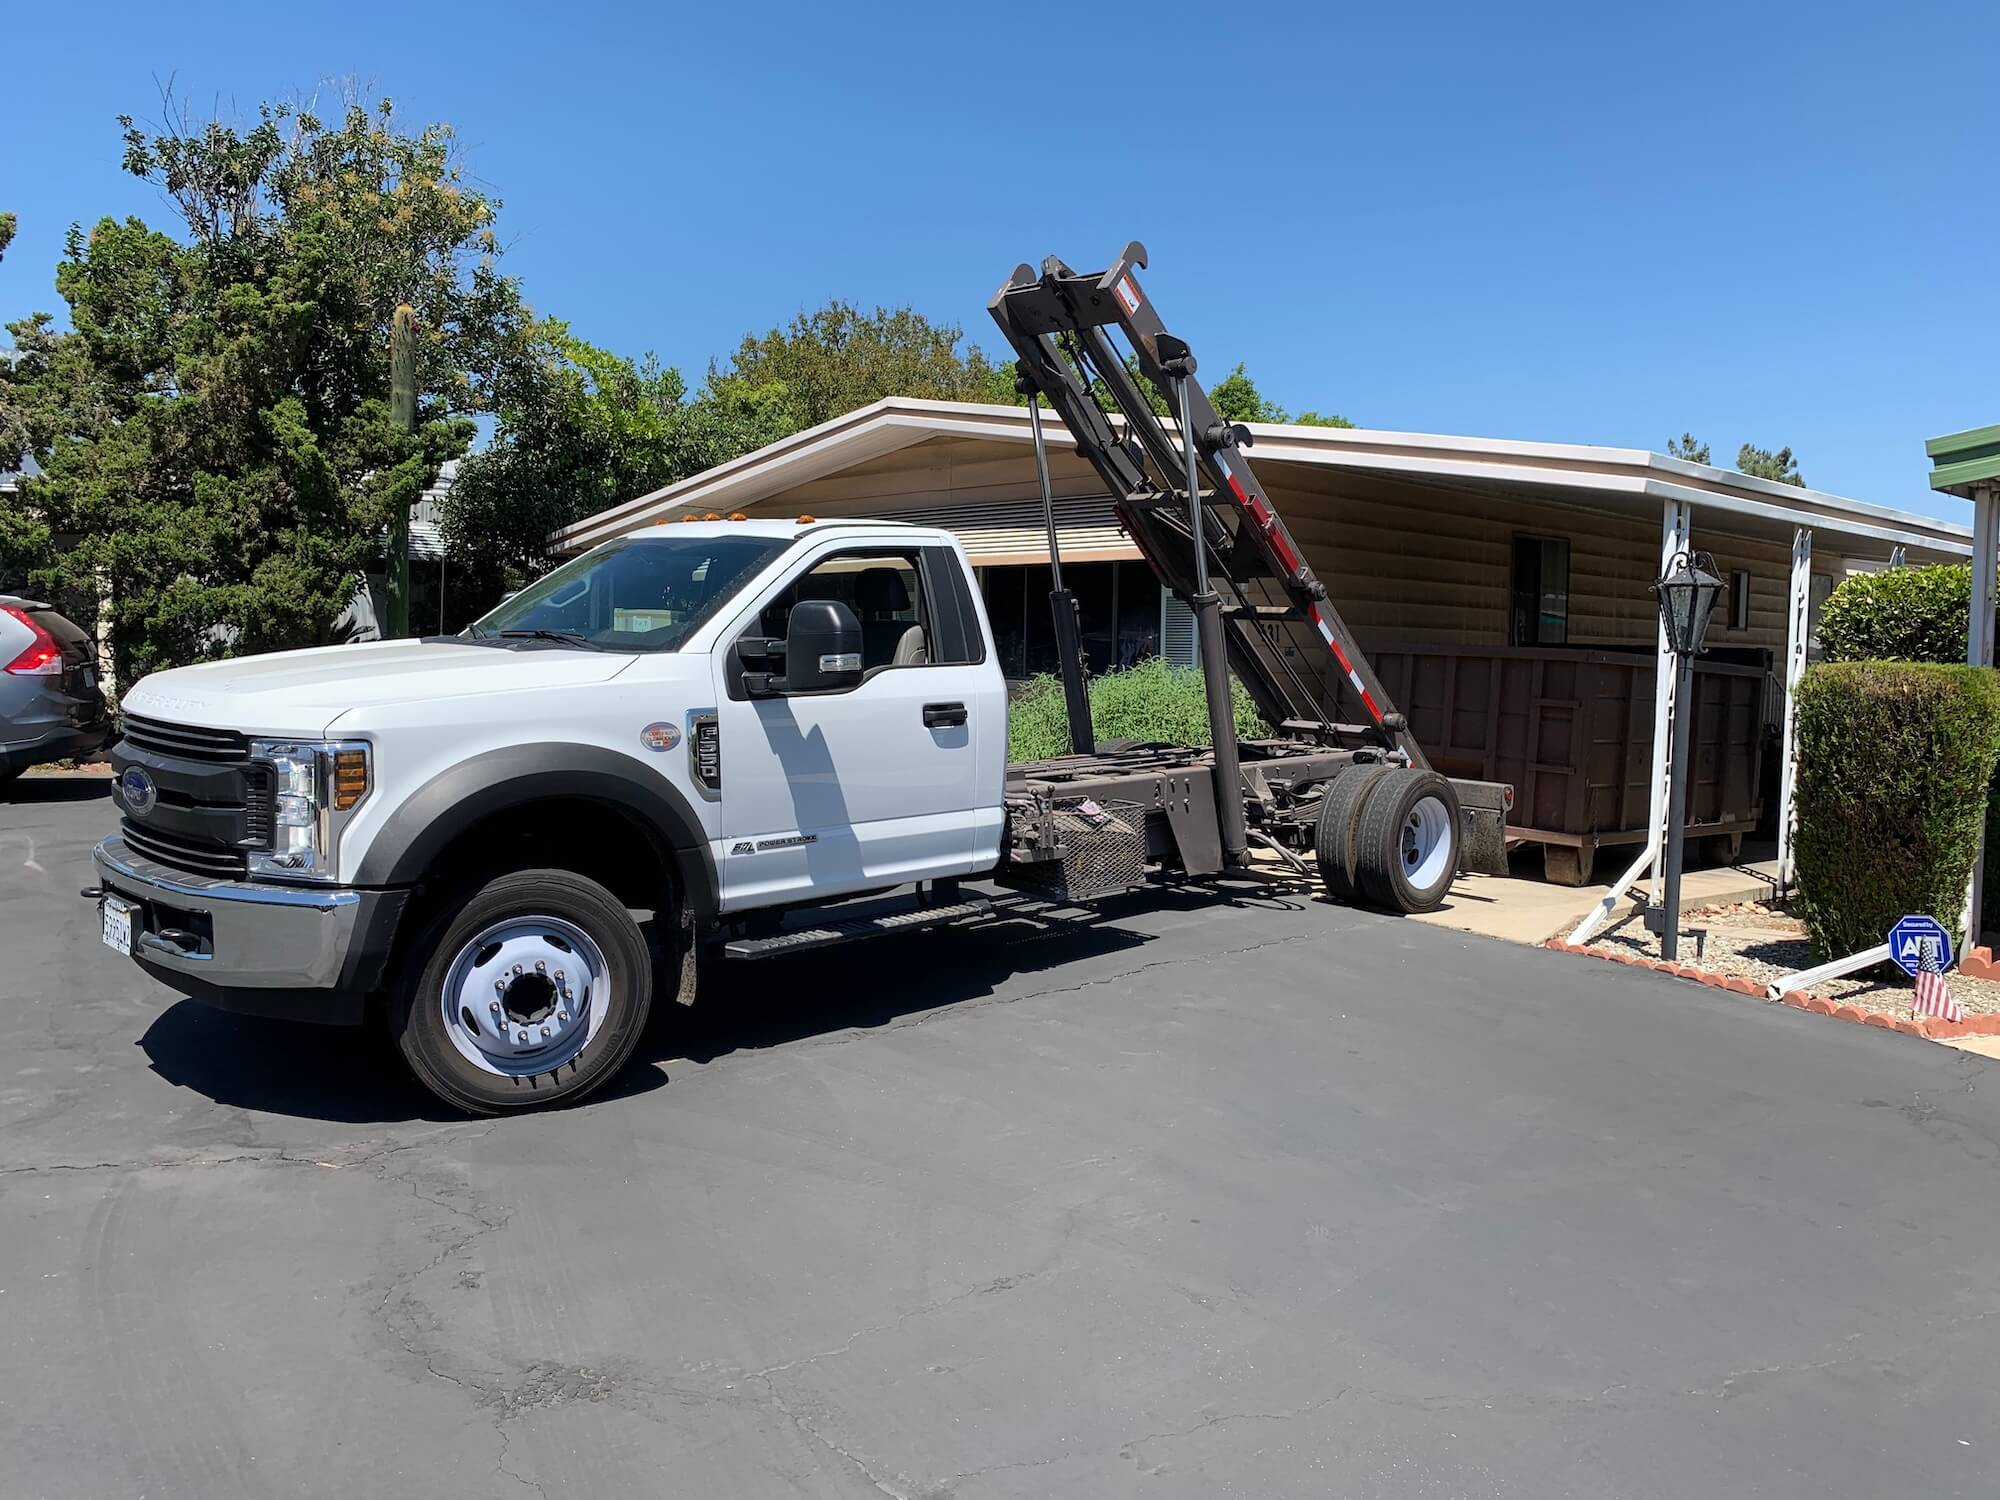 Dumpster Rental in Southern California